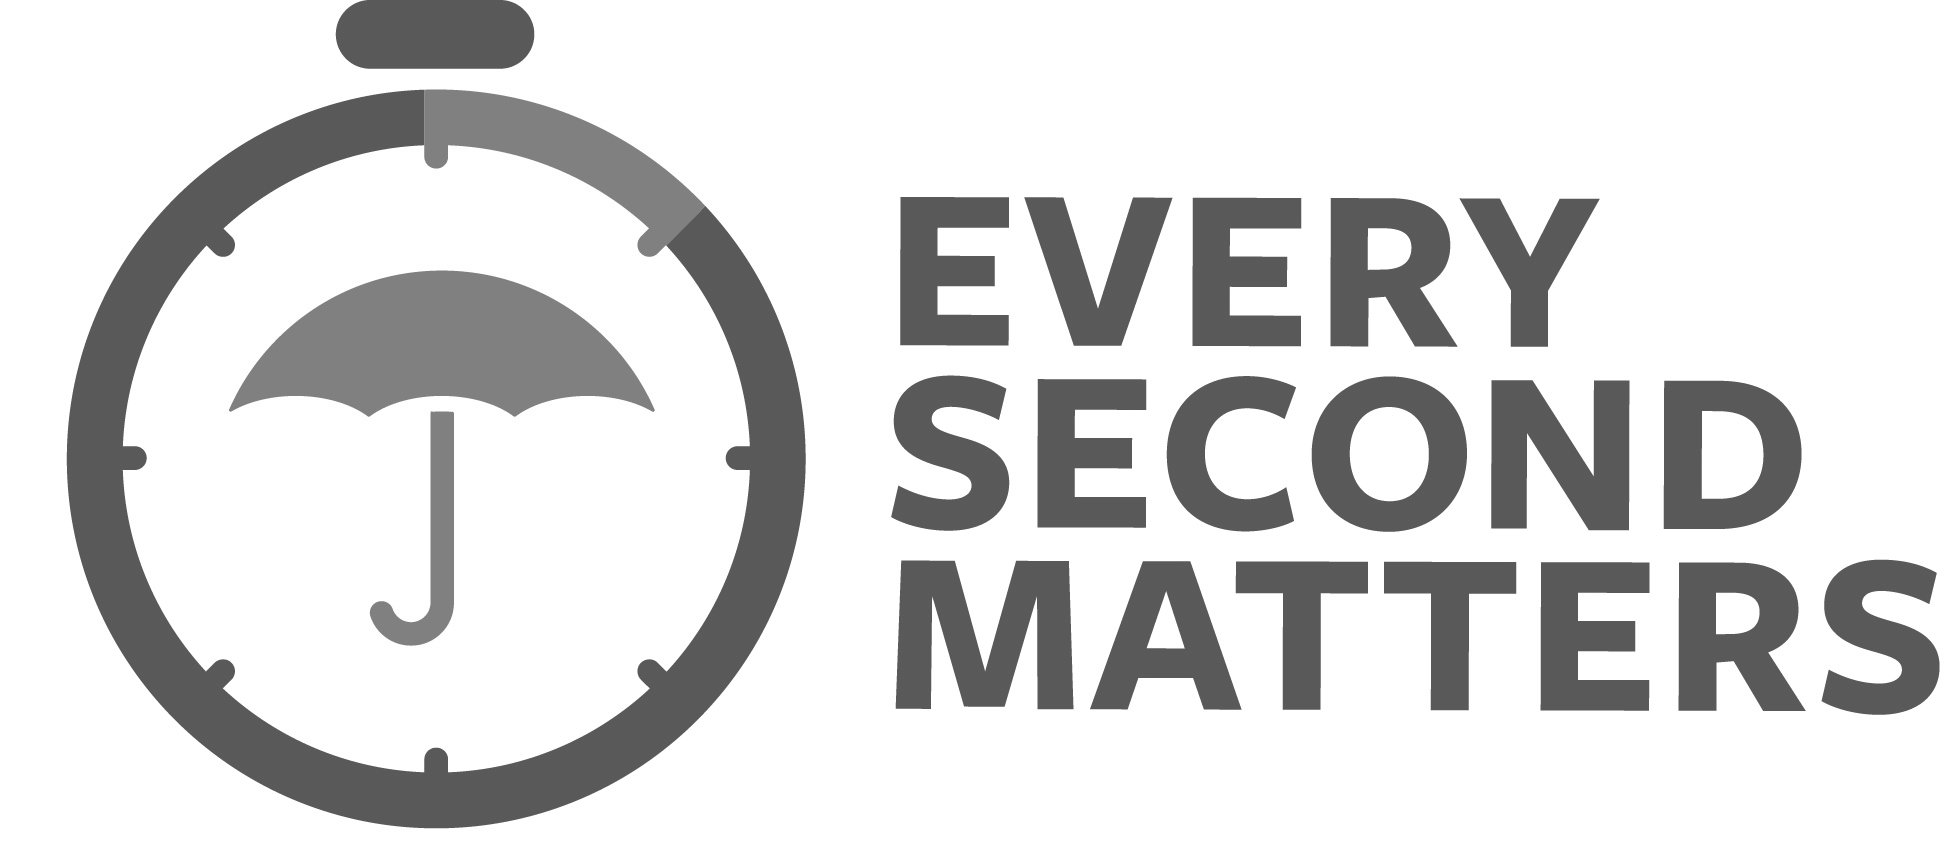 EVERY SECOND MATTERS